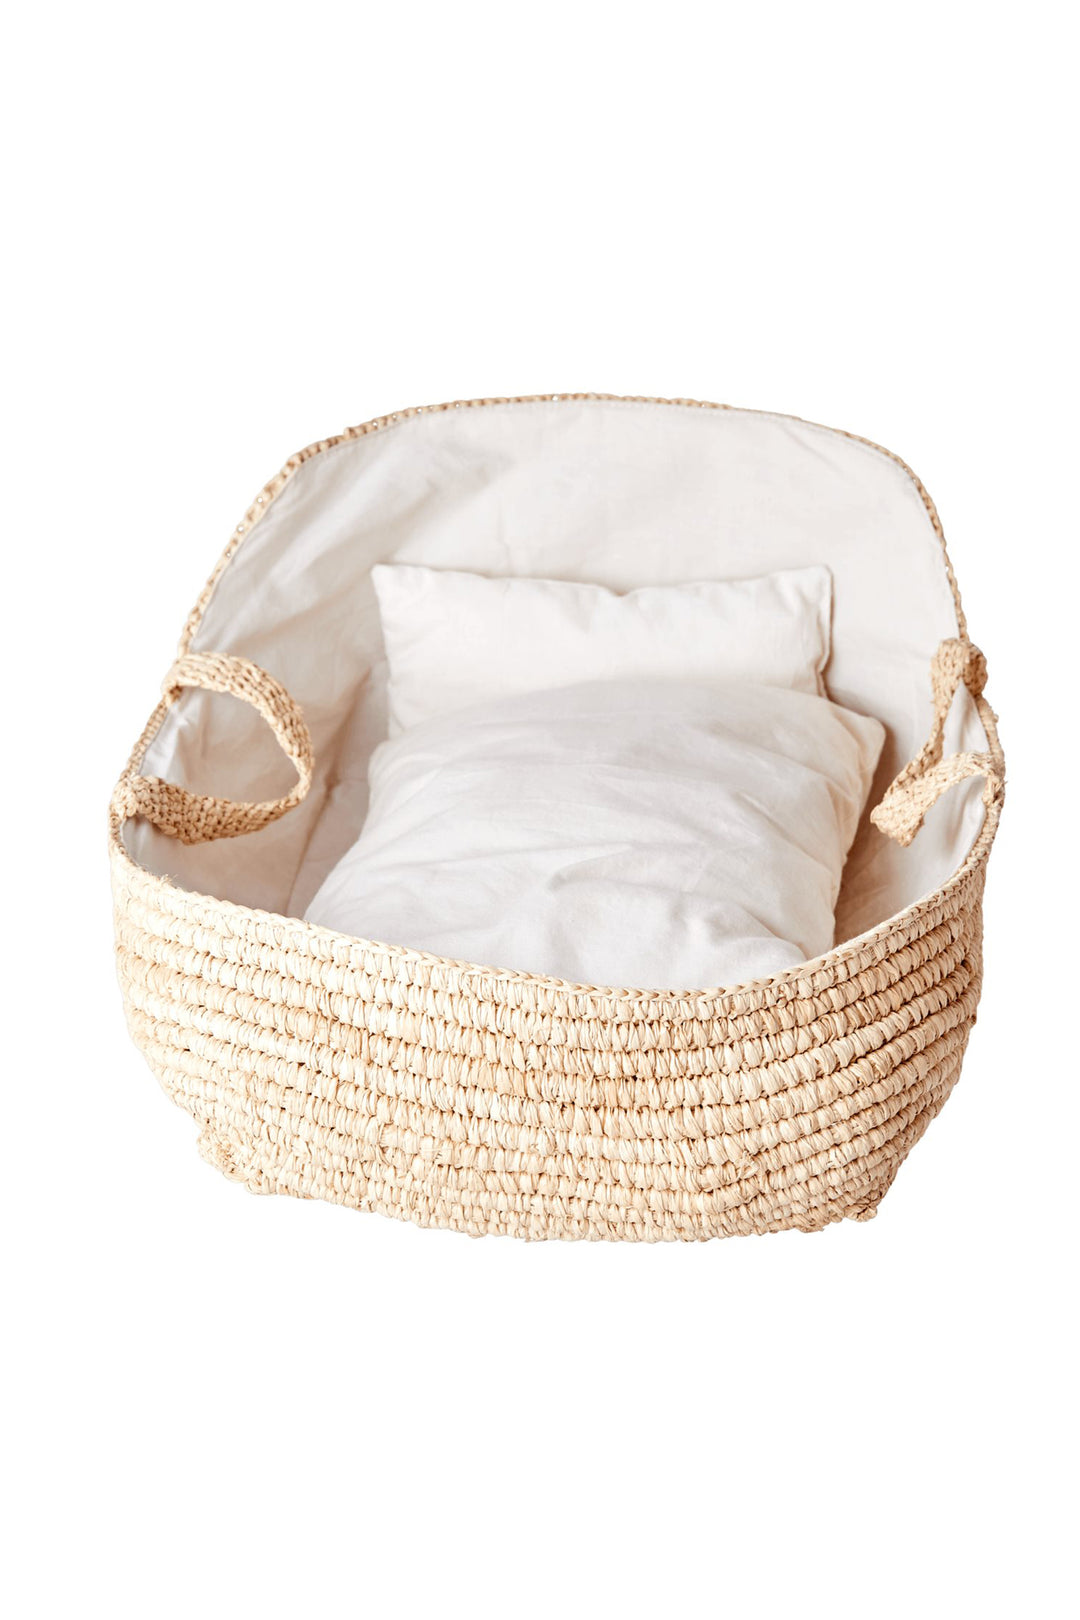 Small Raffia Doll Lift with Pillow and Duvet